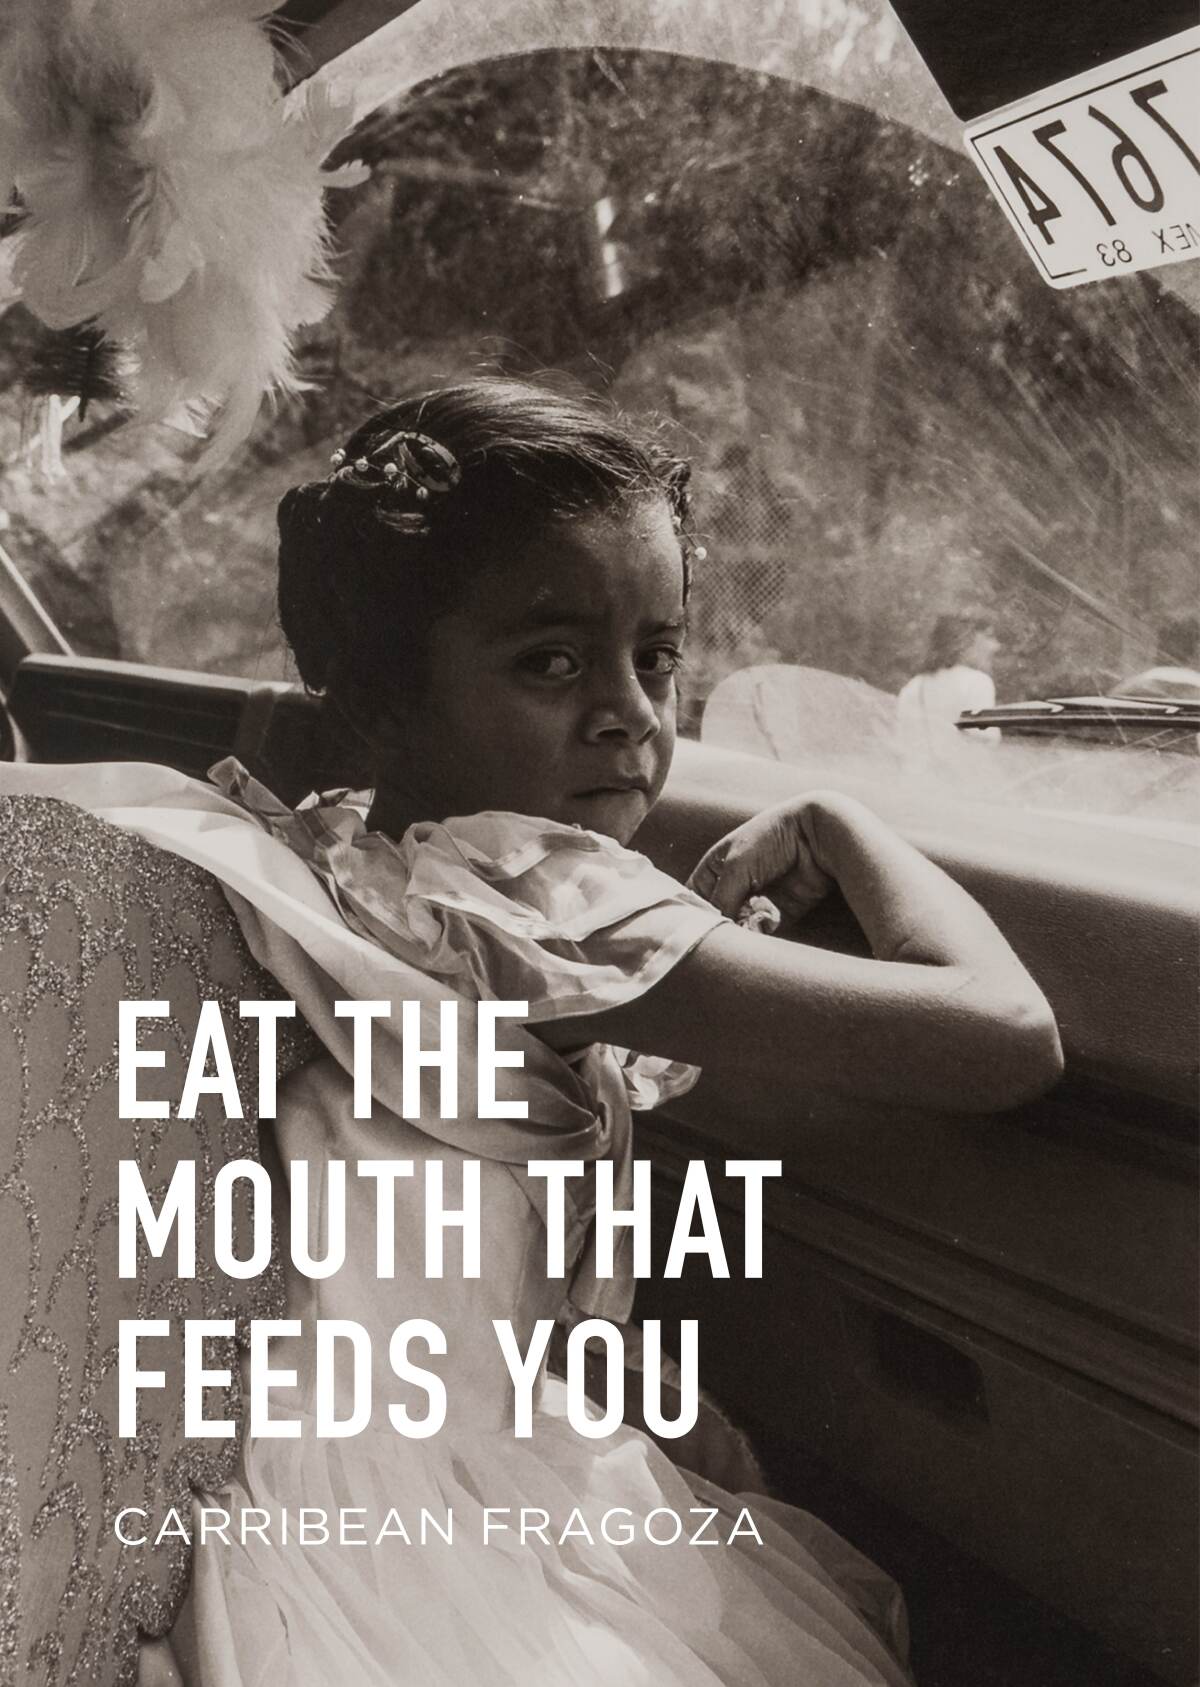 Cover of Carribean Fragoza's book "Eat the Mouth That Feeds You."